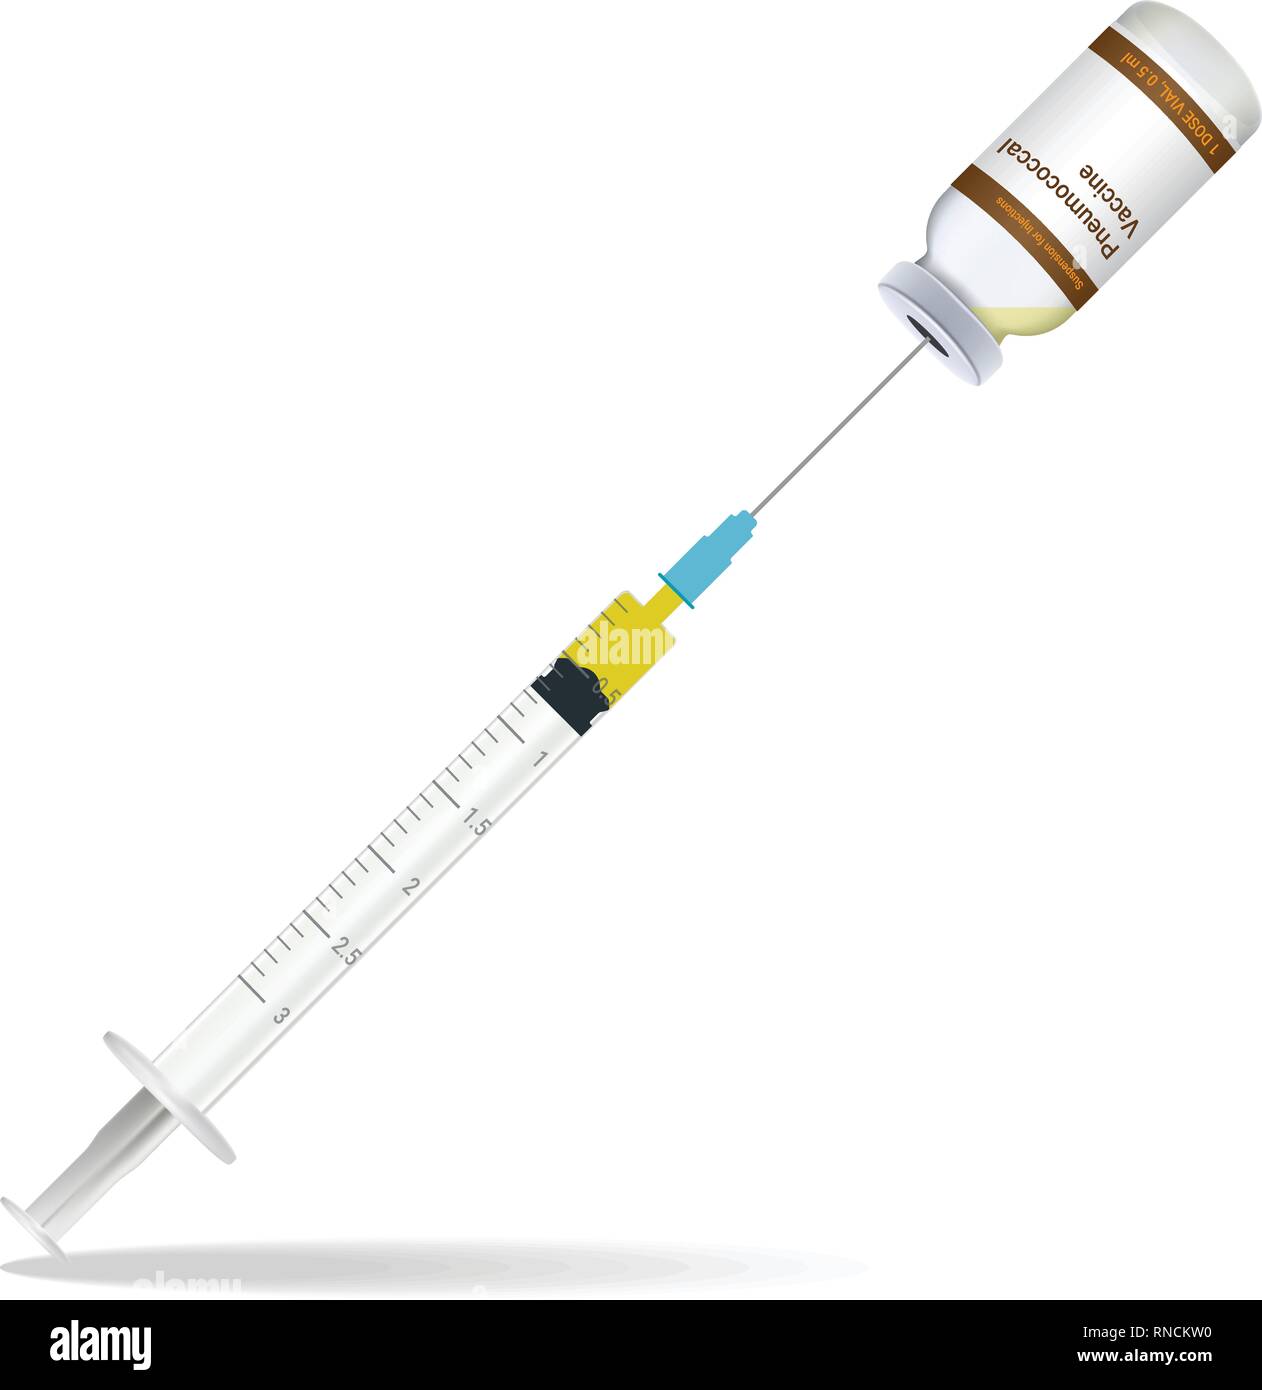 Immunization, Pneumococcal Vaccine Syringe Contain Some Injection And Injection Bottle Isolated On A White Background. Vector Illustration. Stock Vector